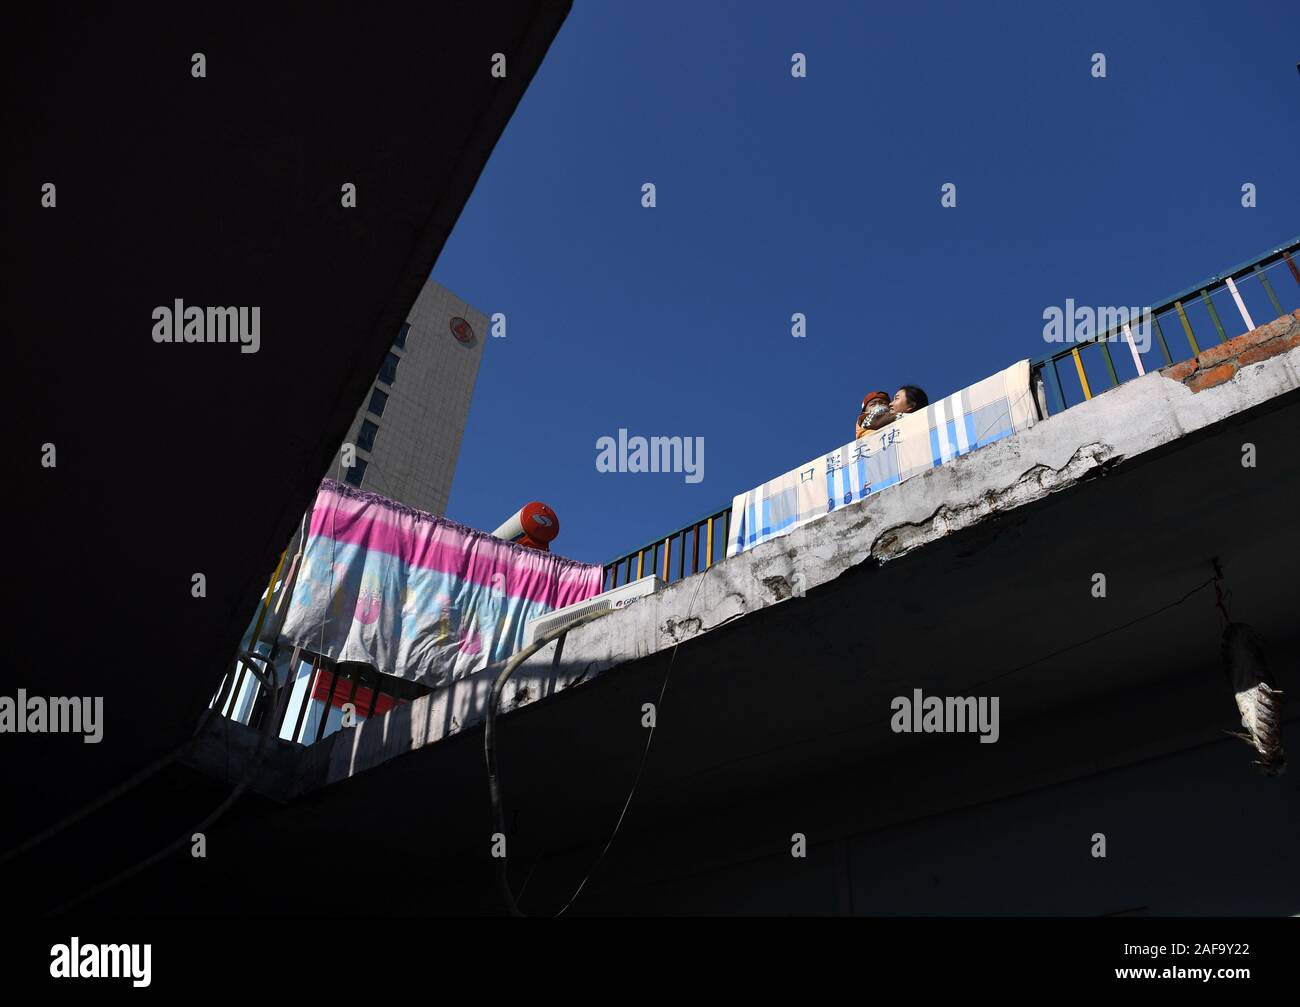 (191214) -- HEFEI, Dec. 14, 2019 (Xinhua) -- A parent and a child are seen on the roof of a hostel near the Children's Hospital in Hefei, east China's Anhui Province, Dec. 9, 2019. Near the Children's Hospital in Hefei, there is a two-story pink building, which is rented by a non-governmental welfare organization as hostel that provides short-term free rooms and self-help 'Love Kitchen' for poverty-stricken families with children seeking medical care. In the 'Love Kitchen', water, electricity, rice, flour, grain, oil and kitchen utensils are all available for free use. In order to make the Stock Photo